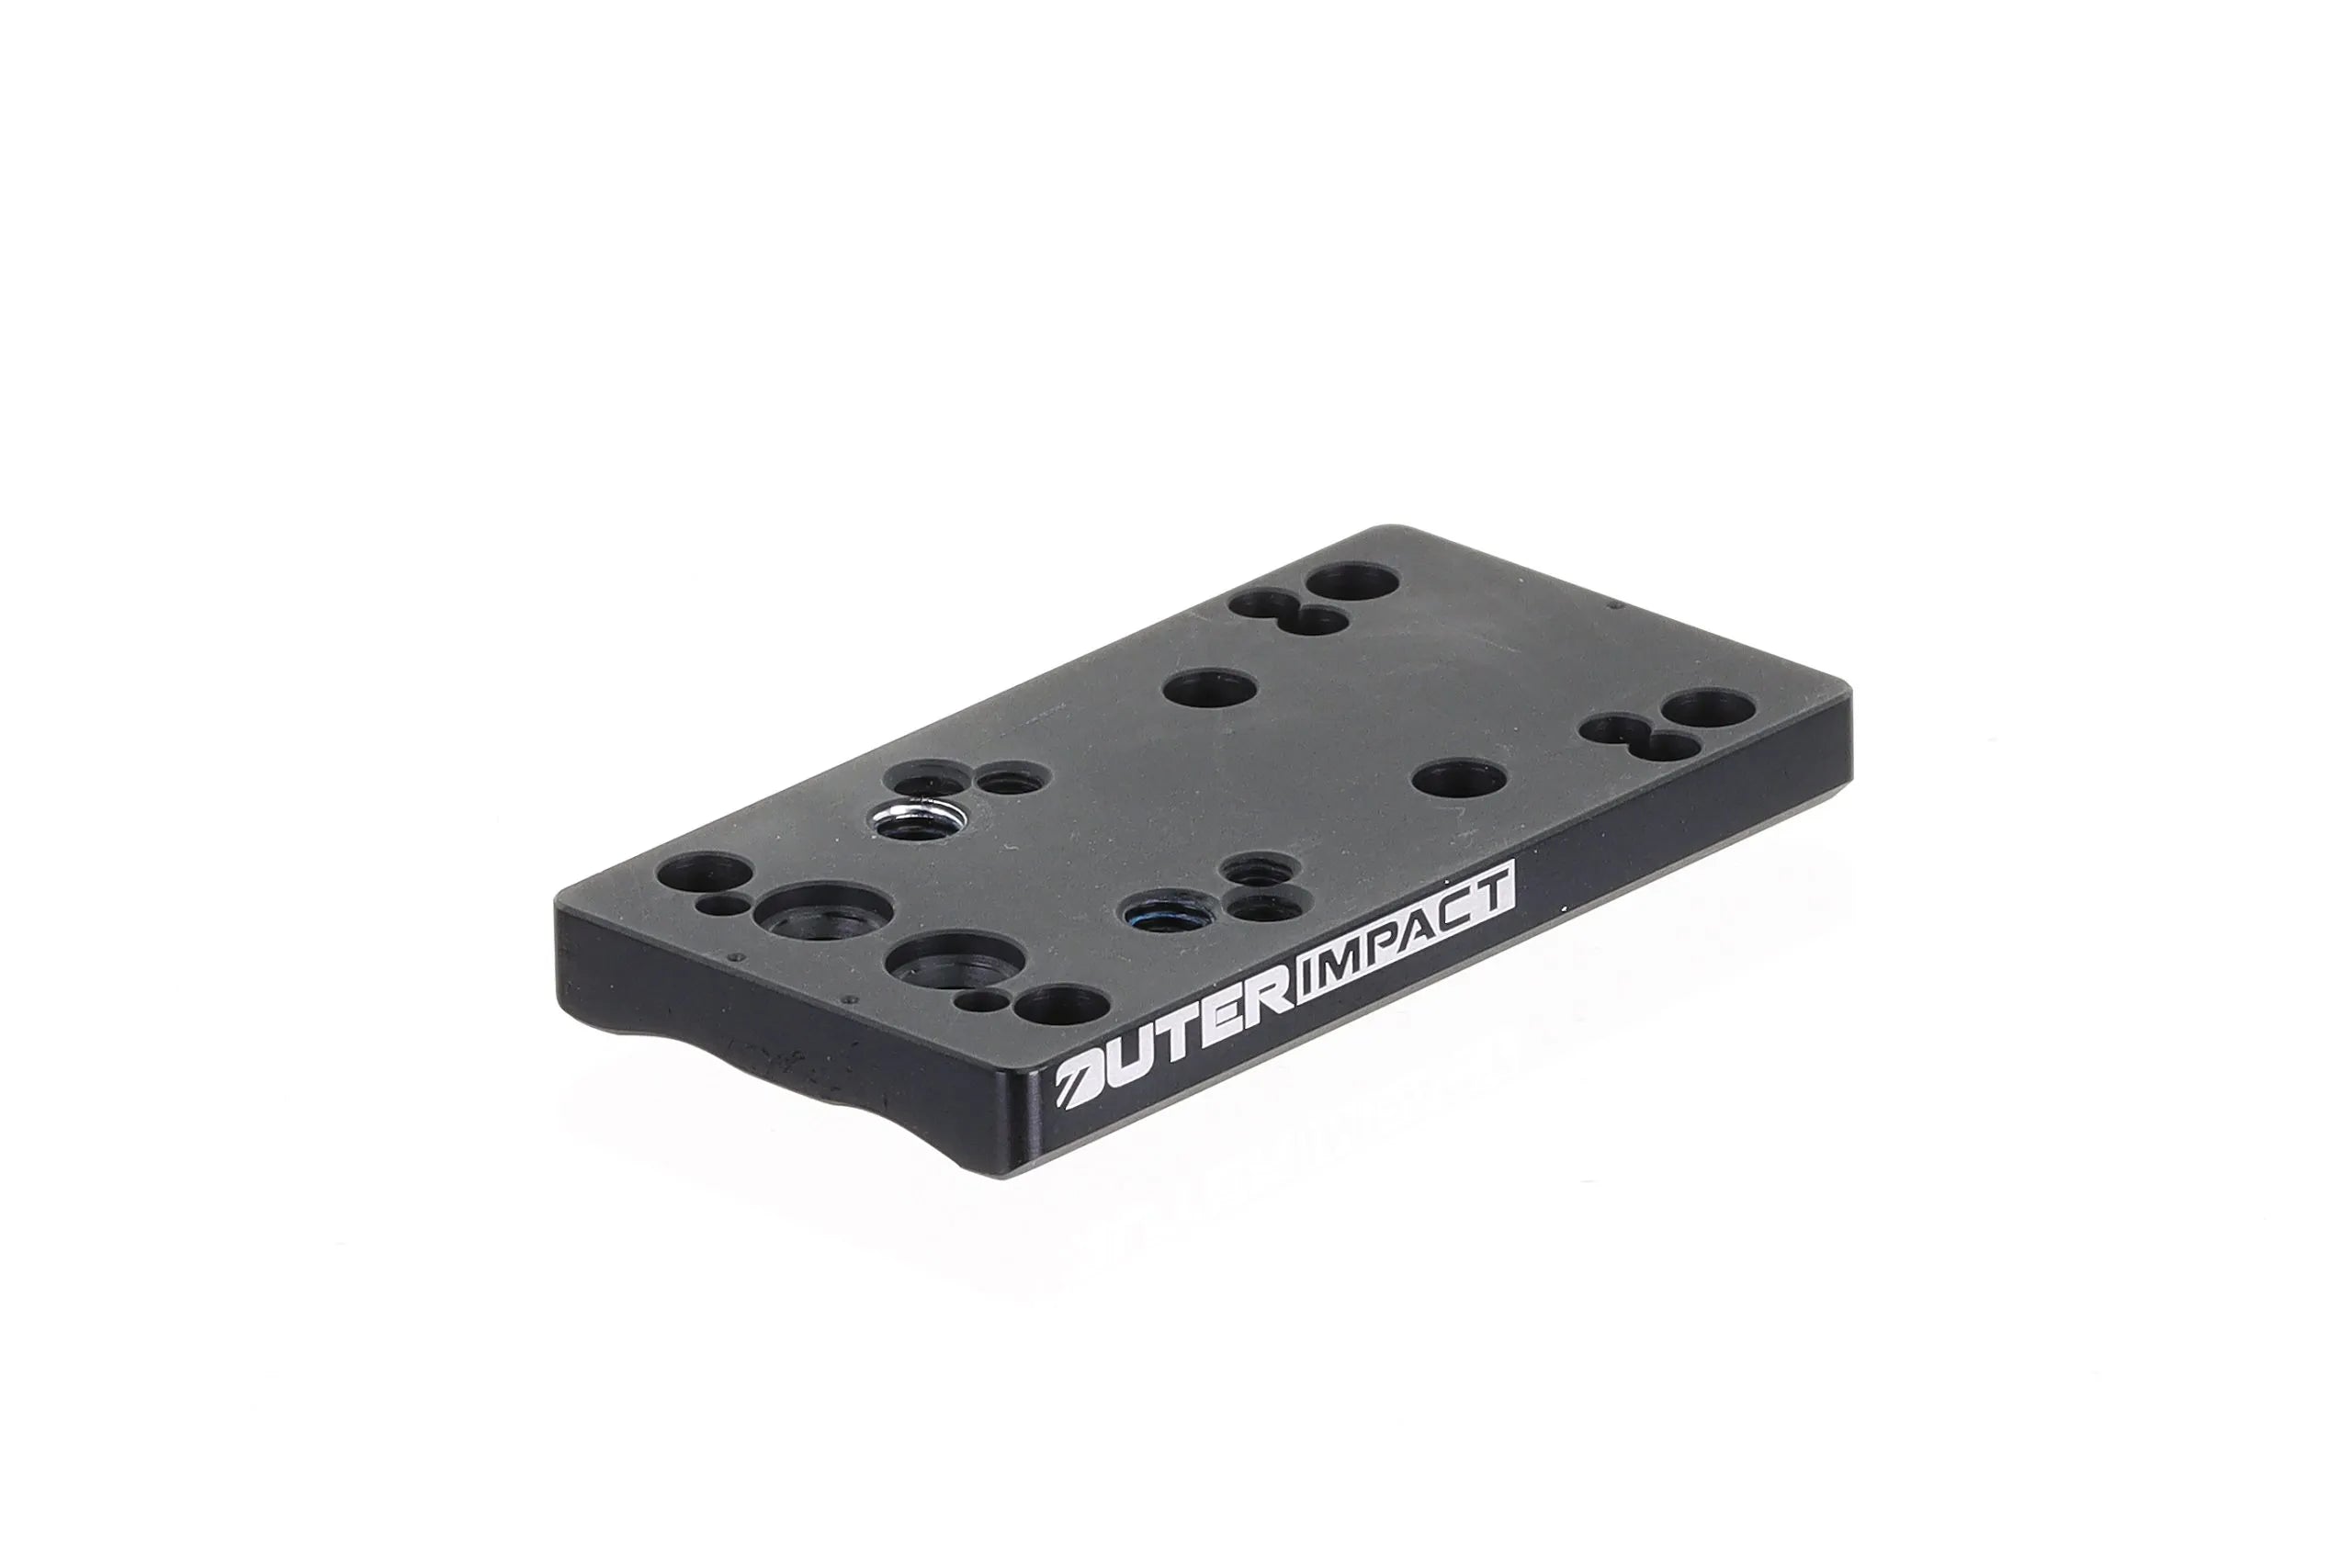 Sig Sauer P365 Pistol Red Dot Adapter Mount Plate - OuterImpact